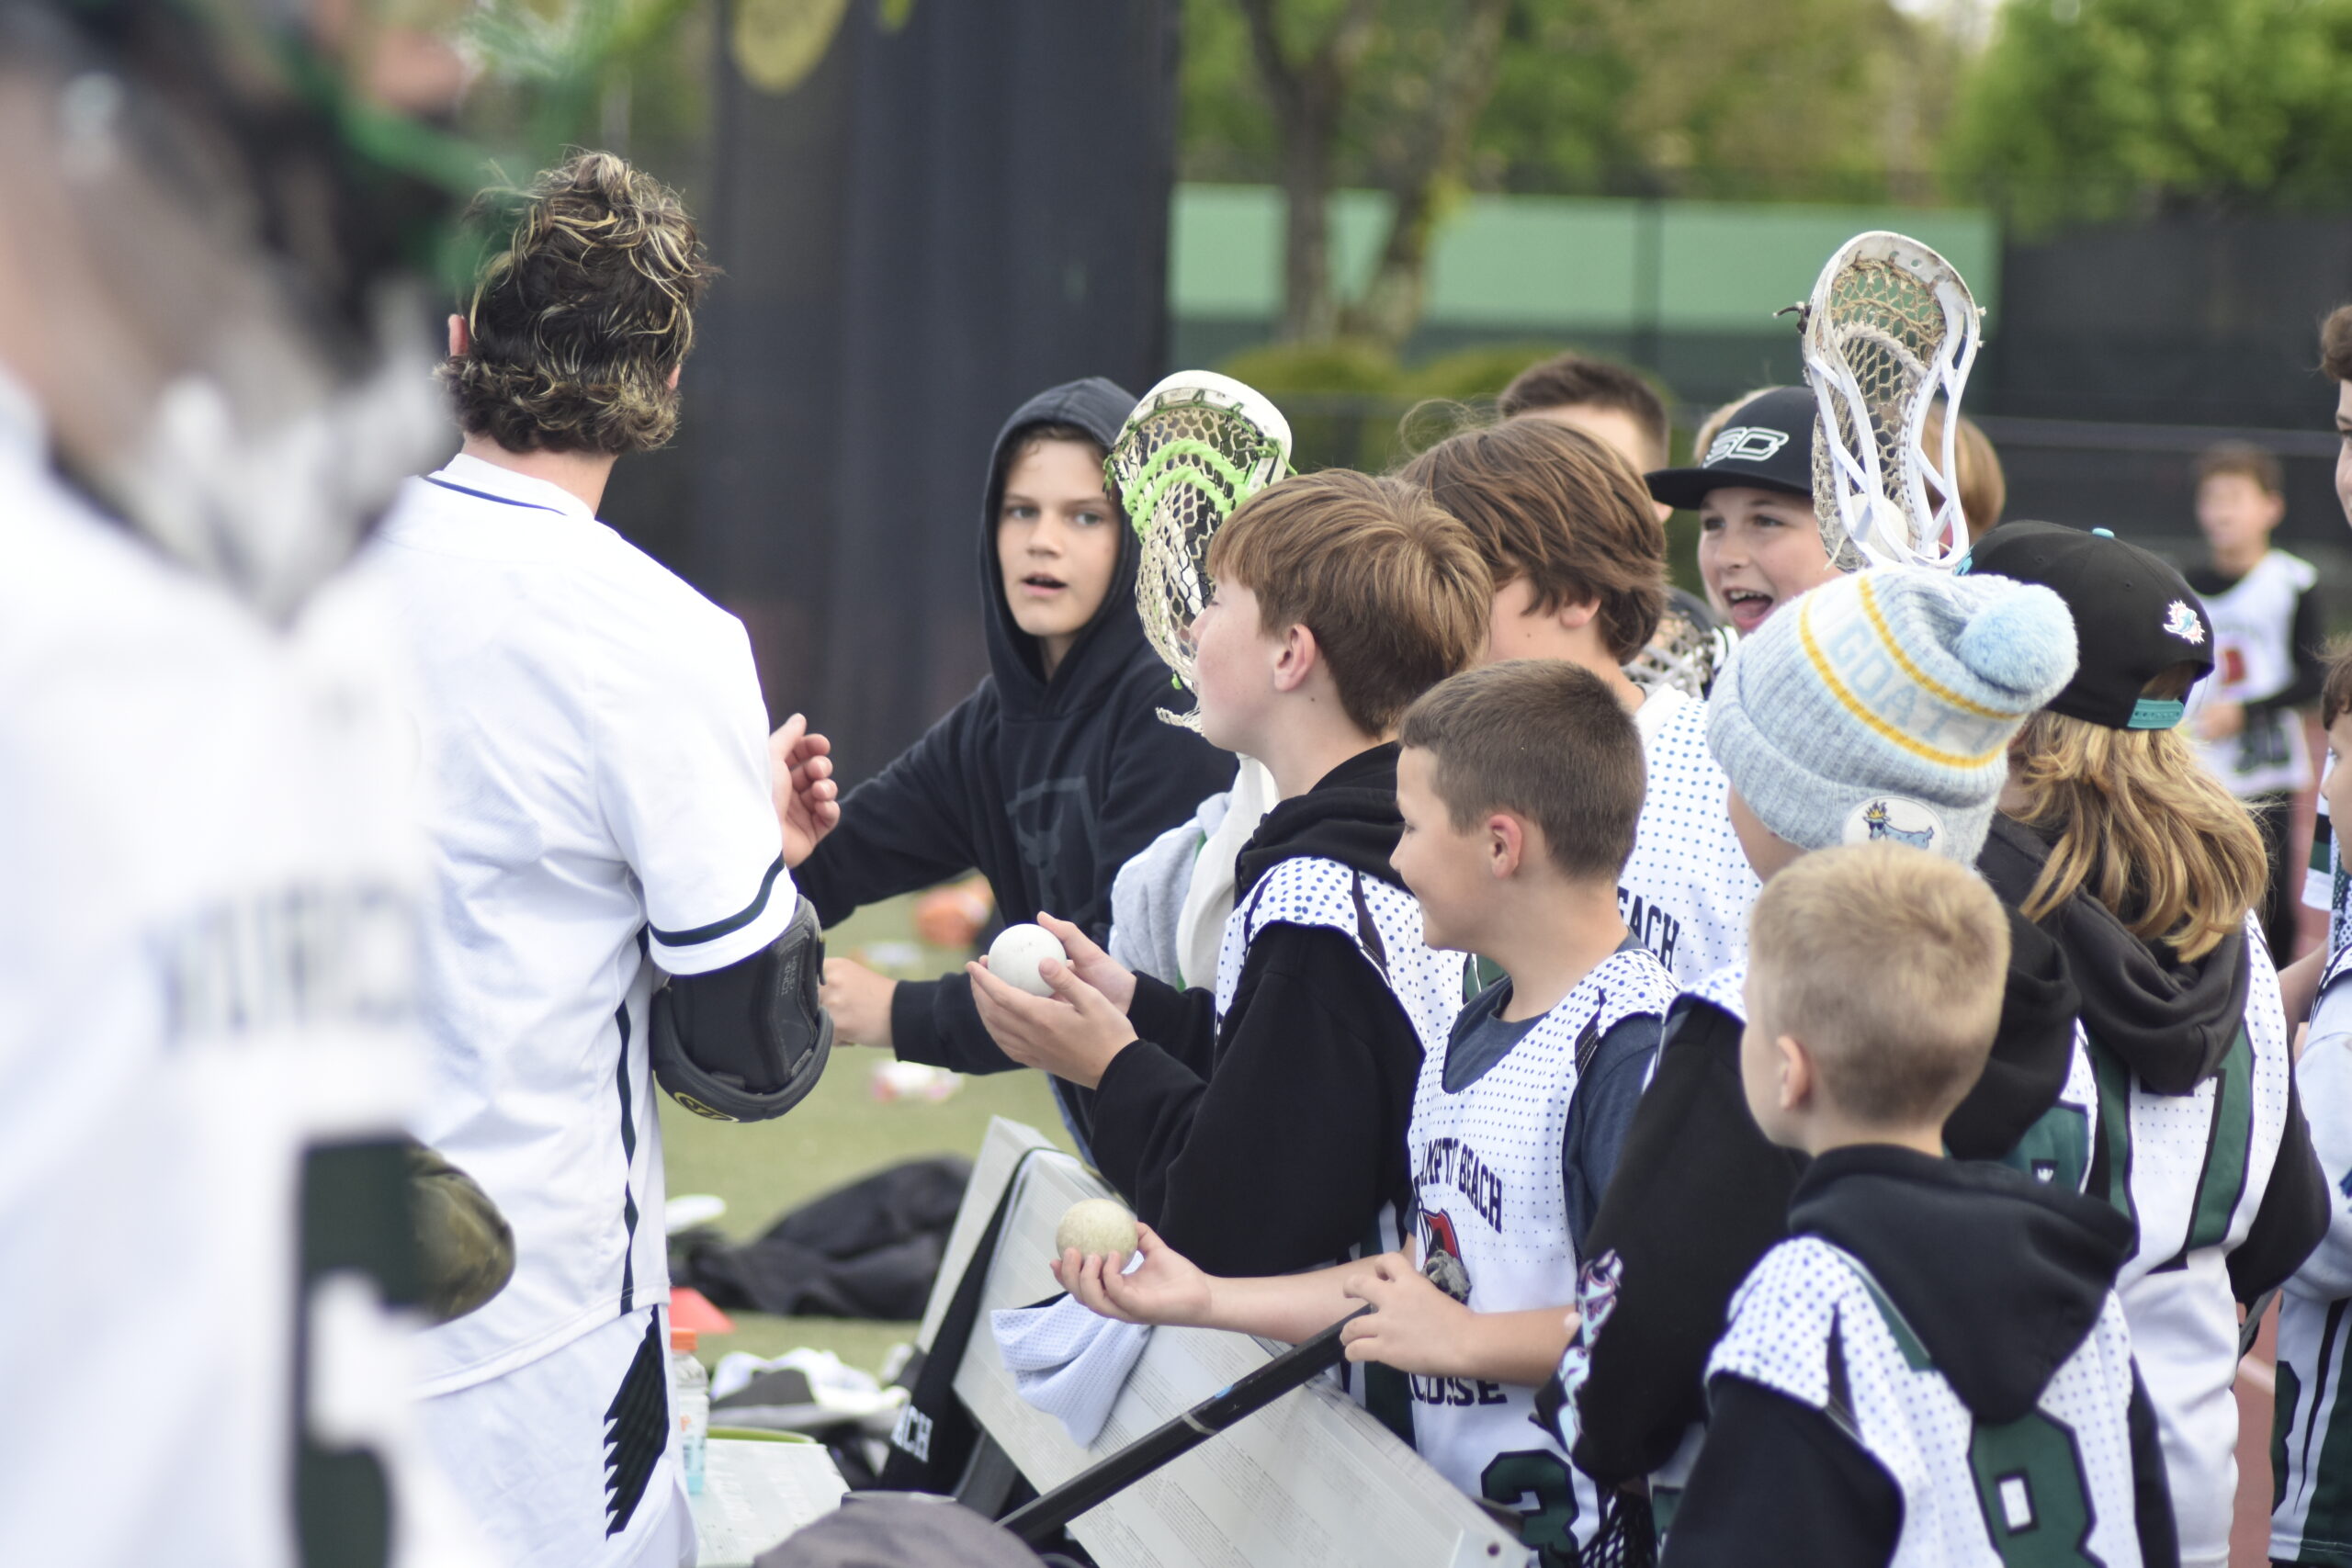 A Westhampton Beach player gives a youth lacrosse player a game ball after the game.   DREW BUDD